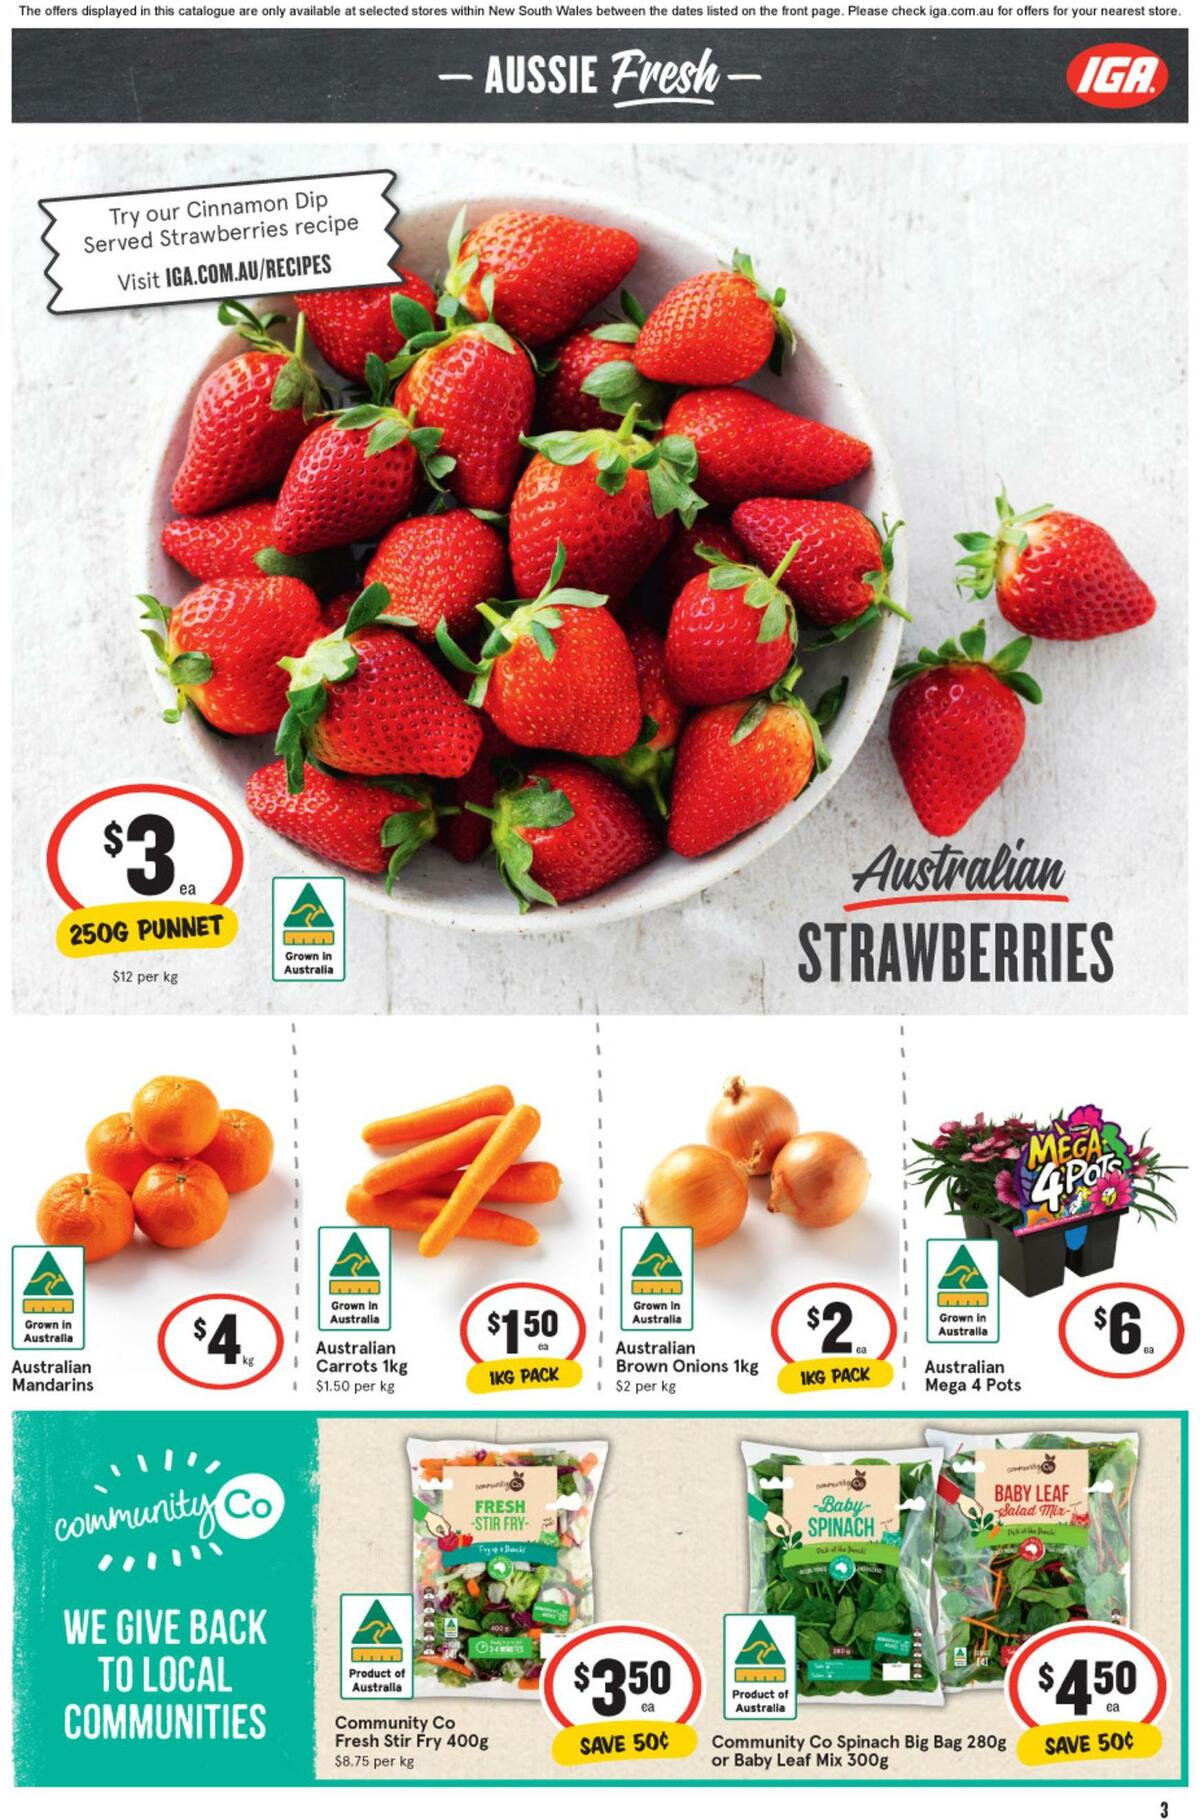 IGA Catalogues from 31 August